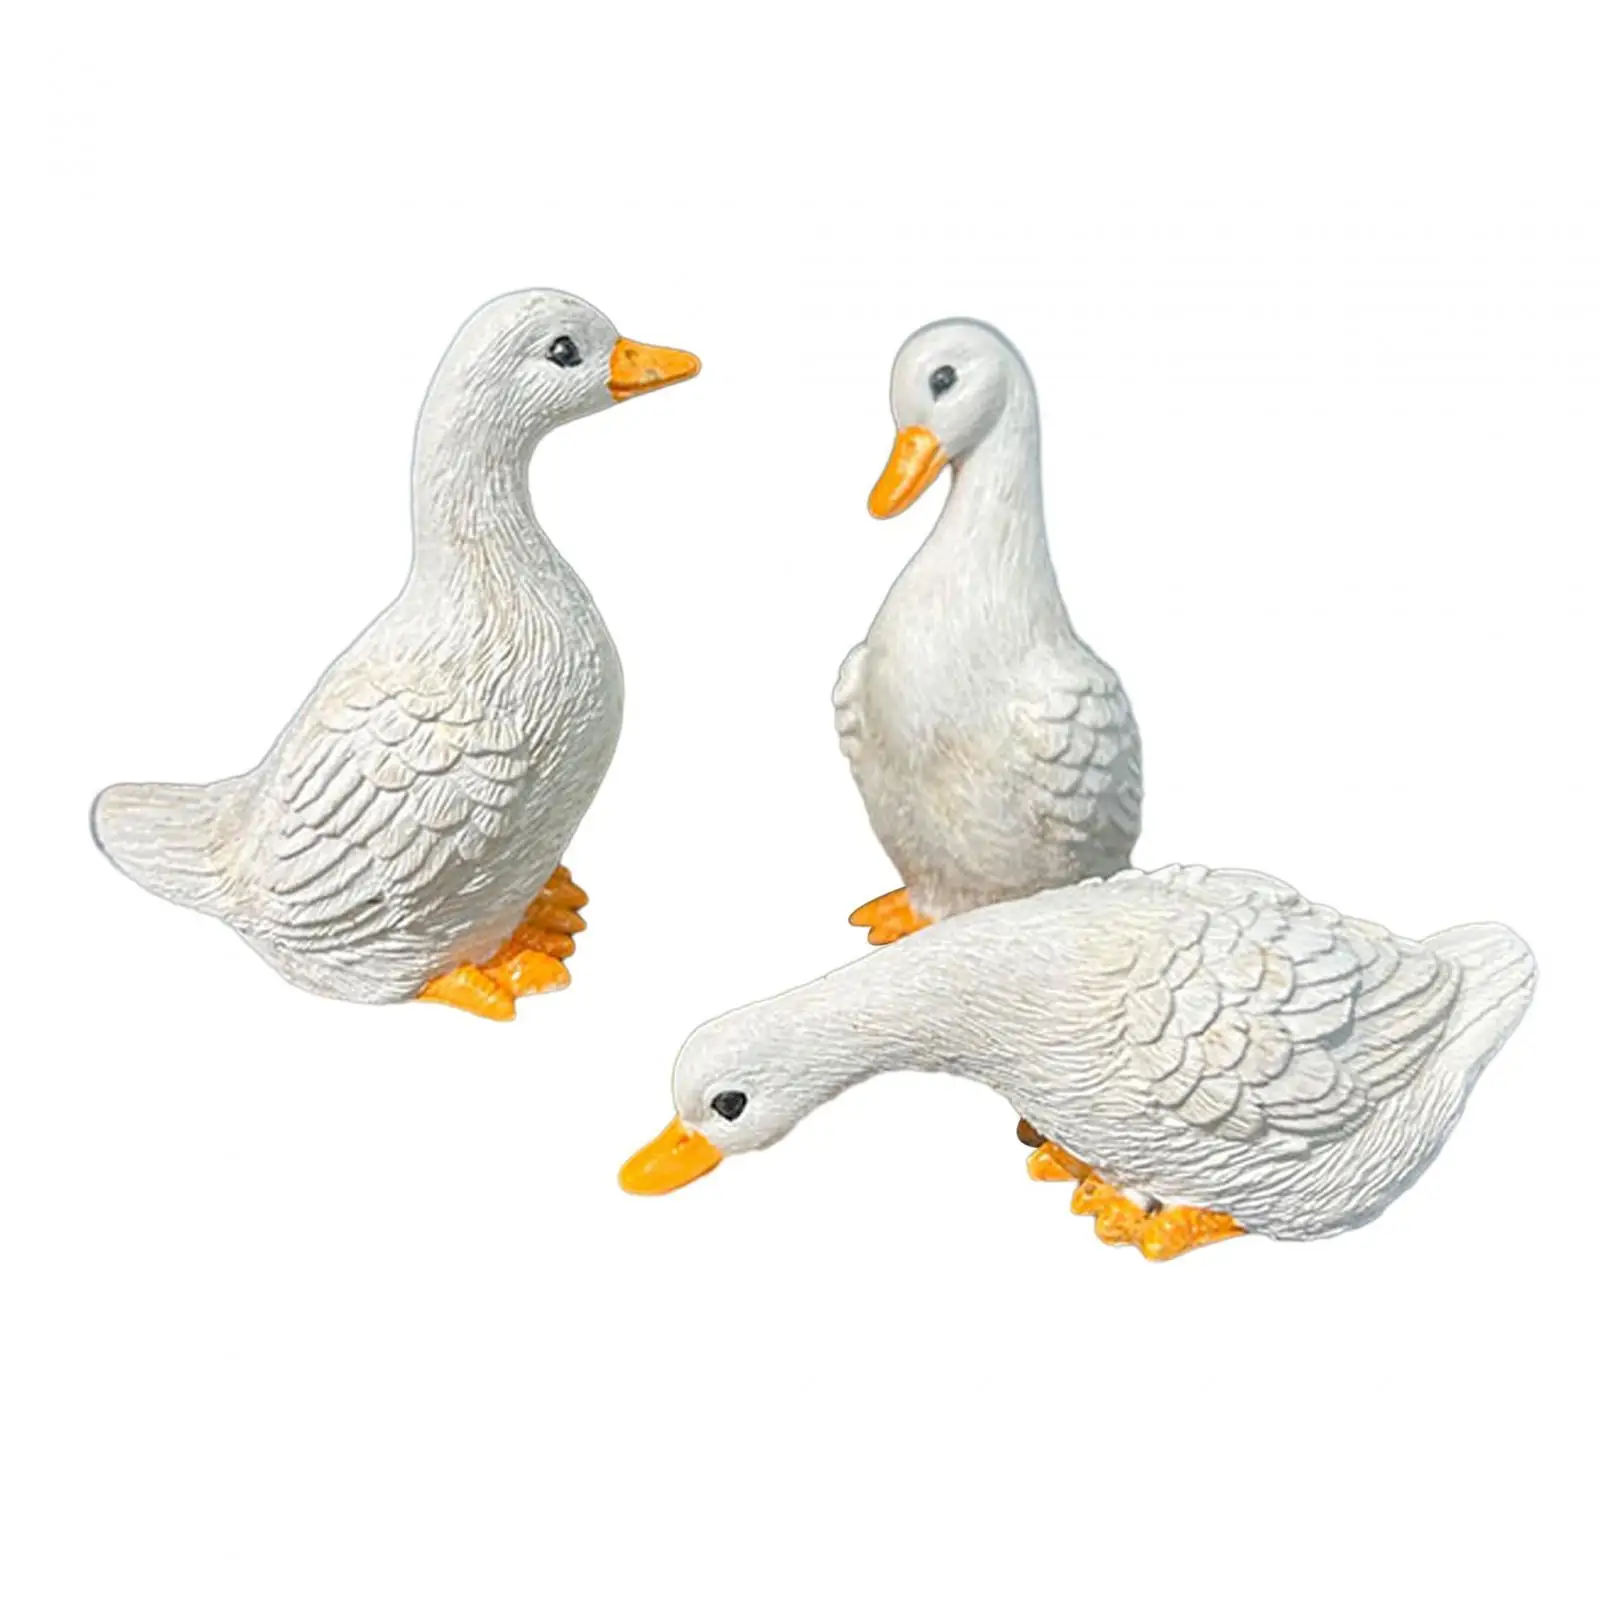 

3Pcs Desktop Ornaments Resin Statues Miniature Garden Decorations Duck Figurines Home Decor for Bedroom Outside Room Outdoors